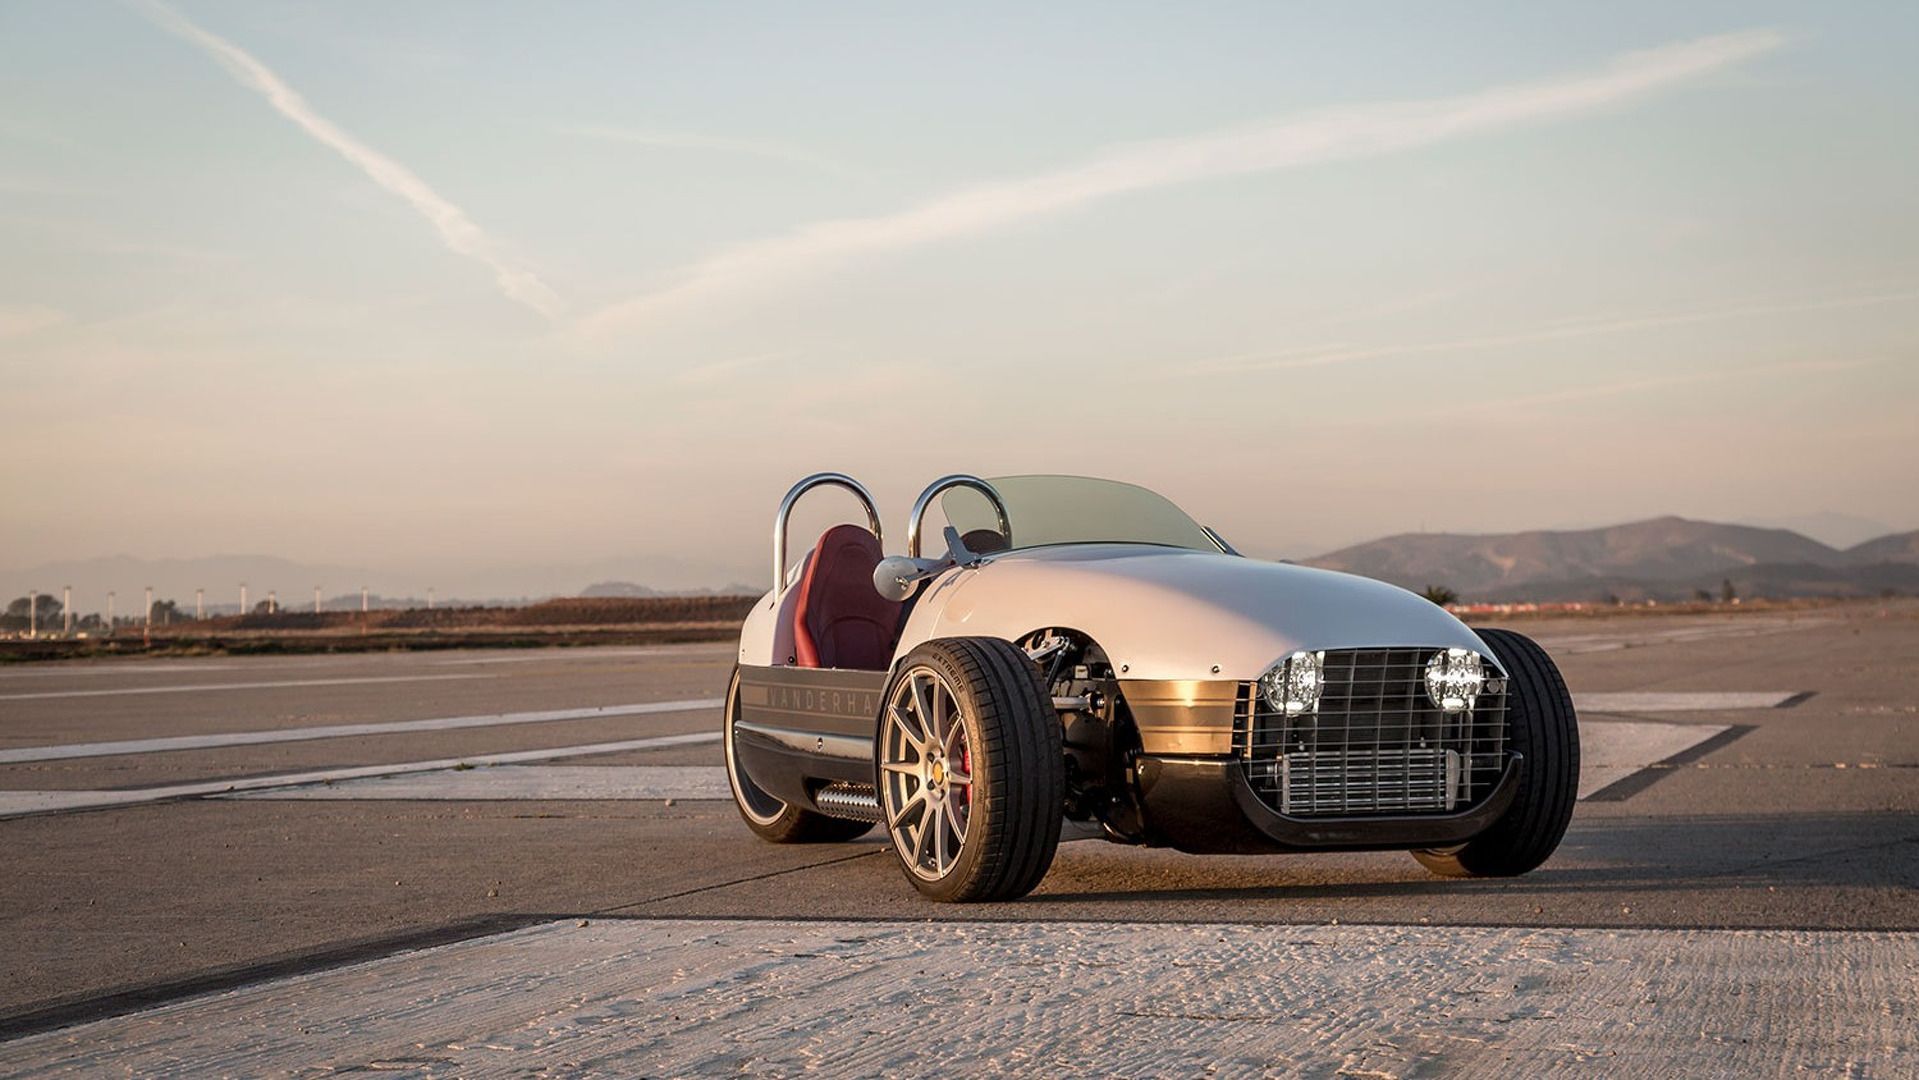 A Vanderhall Venice, the two seater Vanderhall for the practical 3 wheeled car buyer.